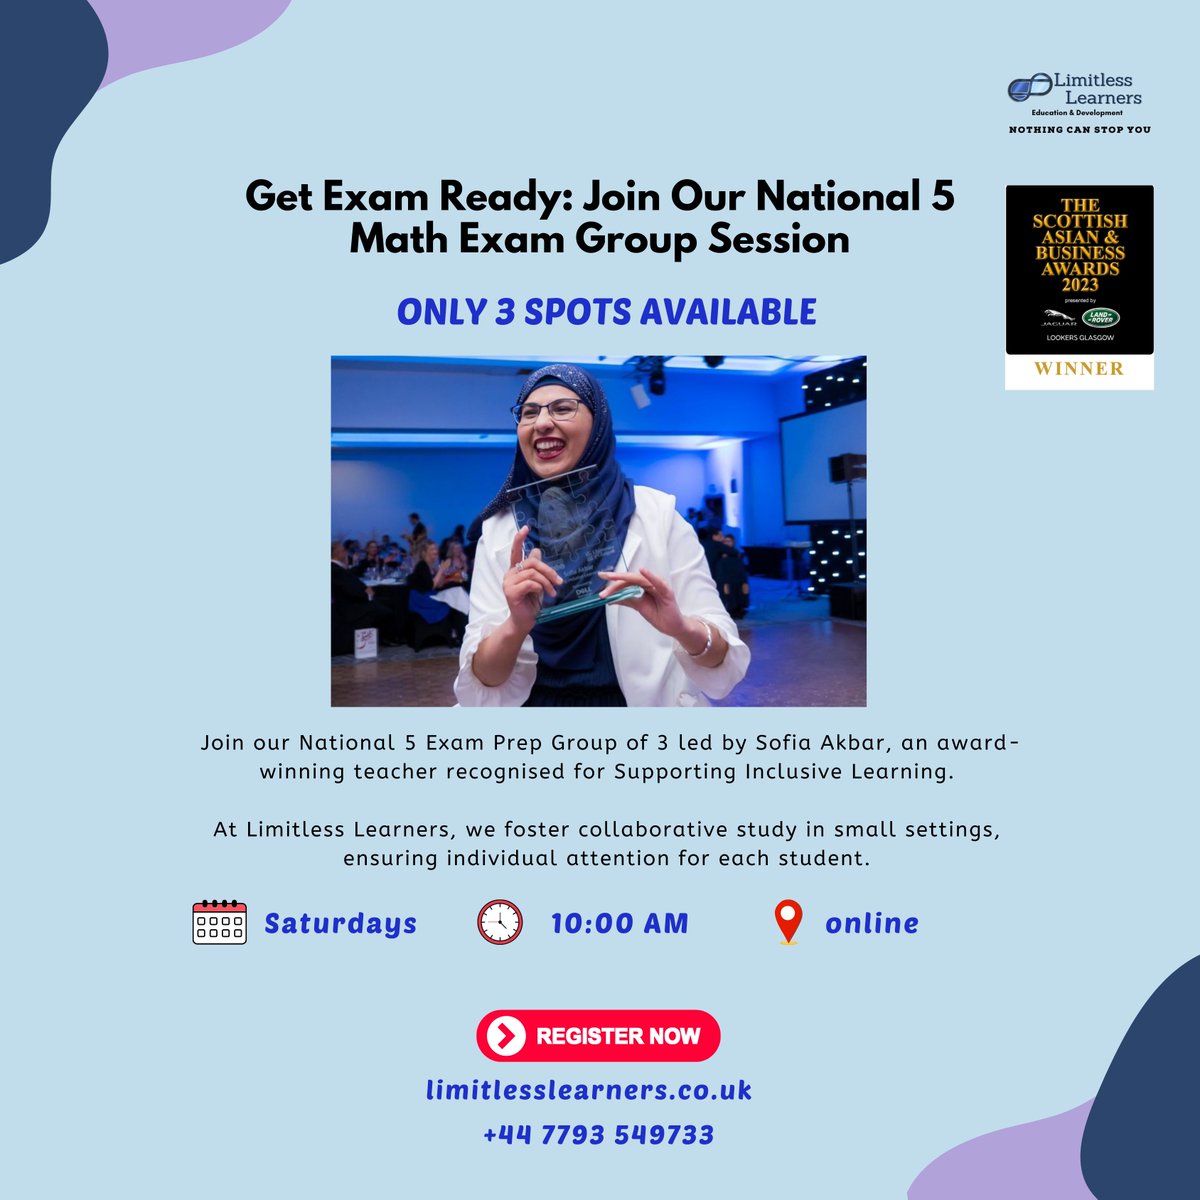 To ace exams, join our National 5 Group of 3 led by award-winning tutor @MathsAkbar  ! 🏆 Receive personalised support and collaborative learning strategies tailored for success.

Message us on WhatsApp 📲 +44 7793 549733 to secure your spot!

#national5 #groupstudy #mathexam